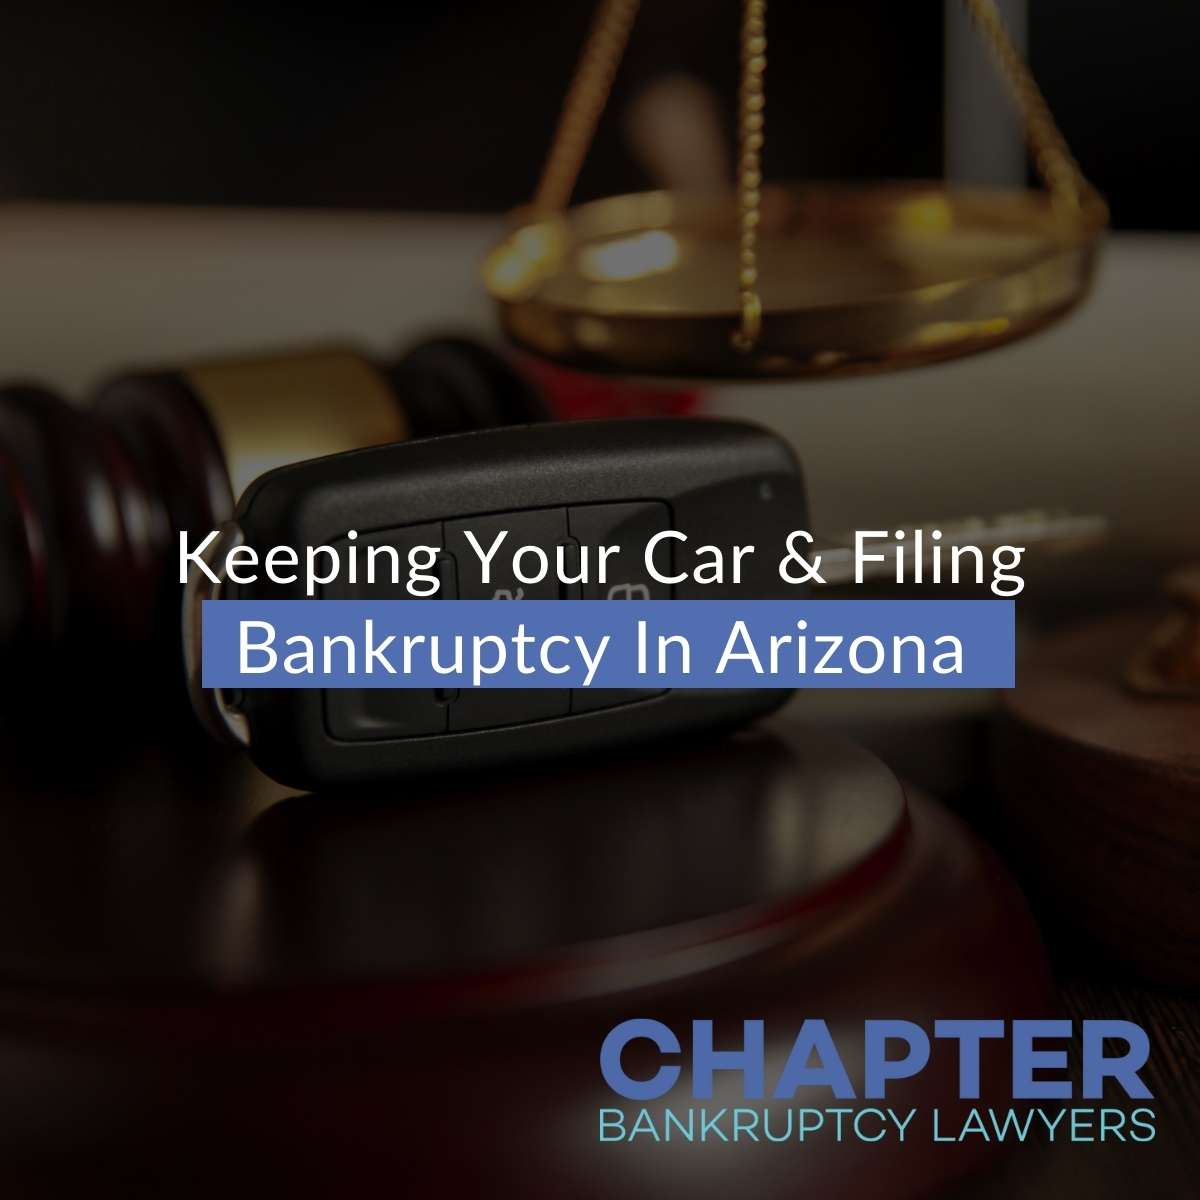 Keeping Your Car & Filing Bankruptcy In Arizona